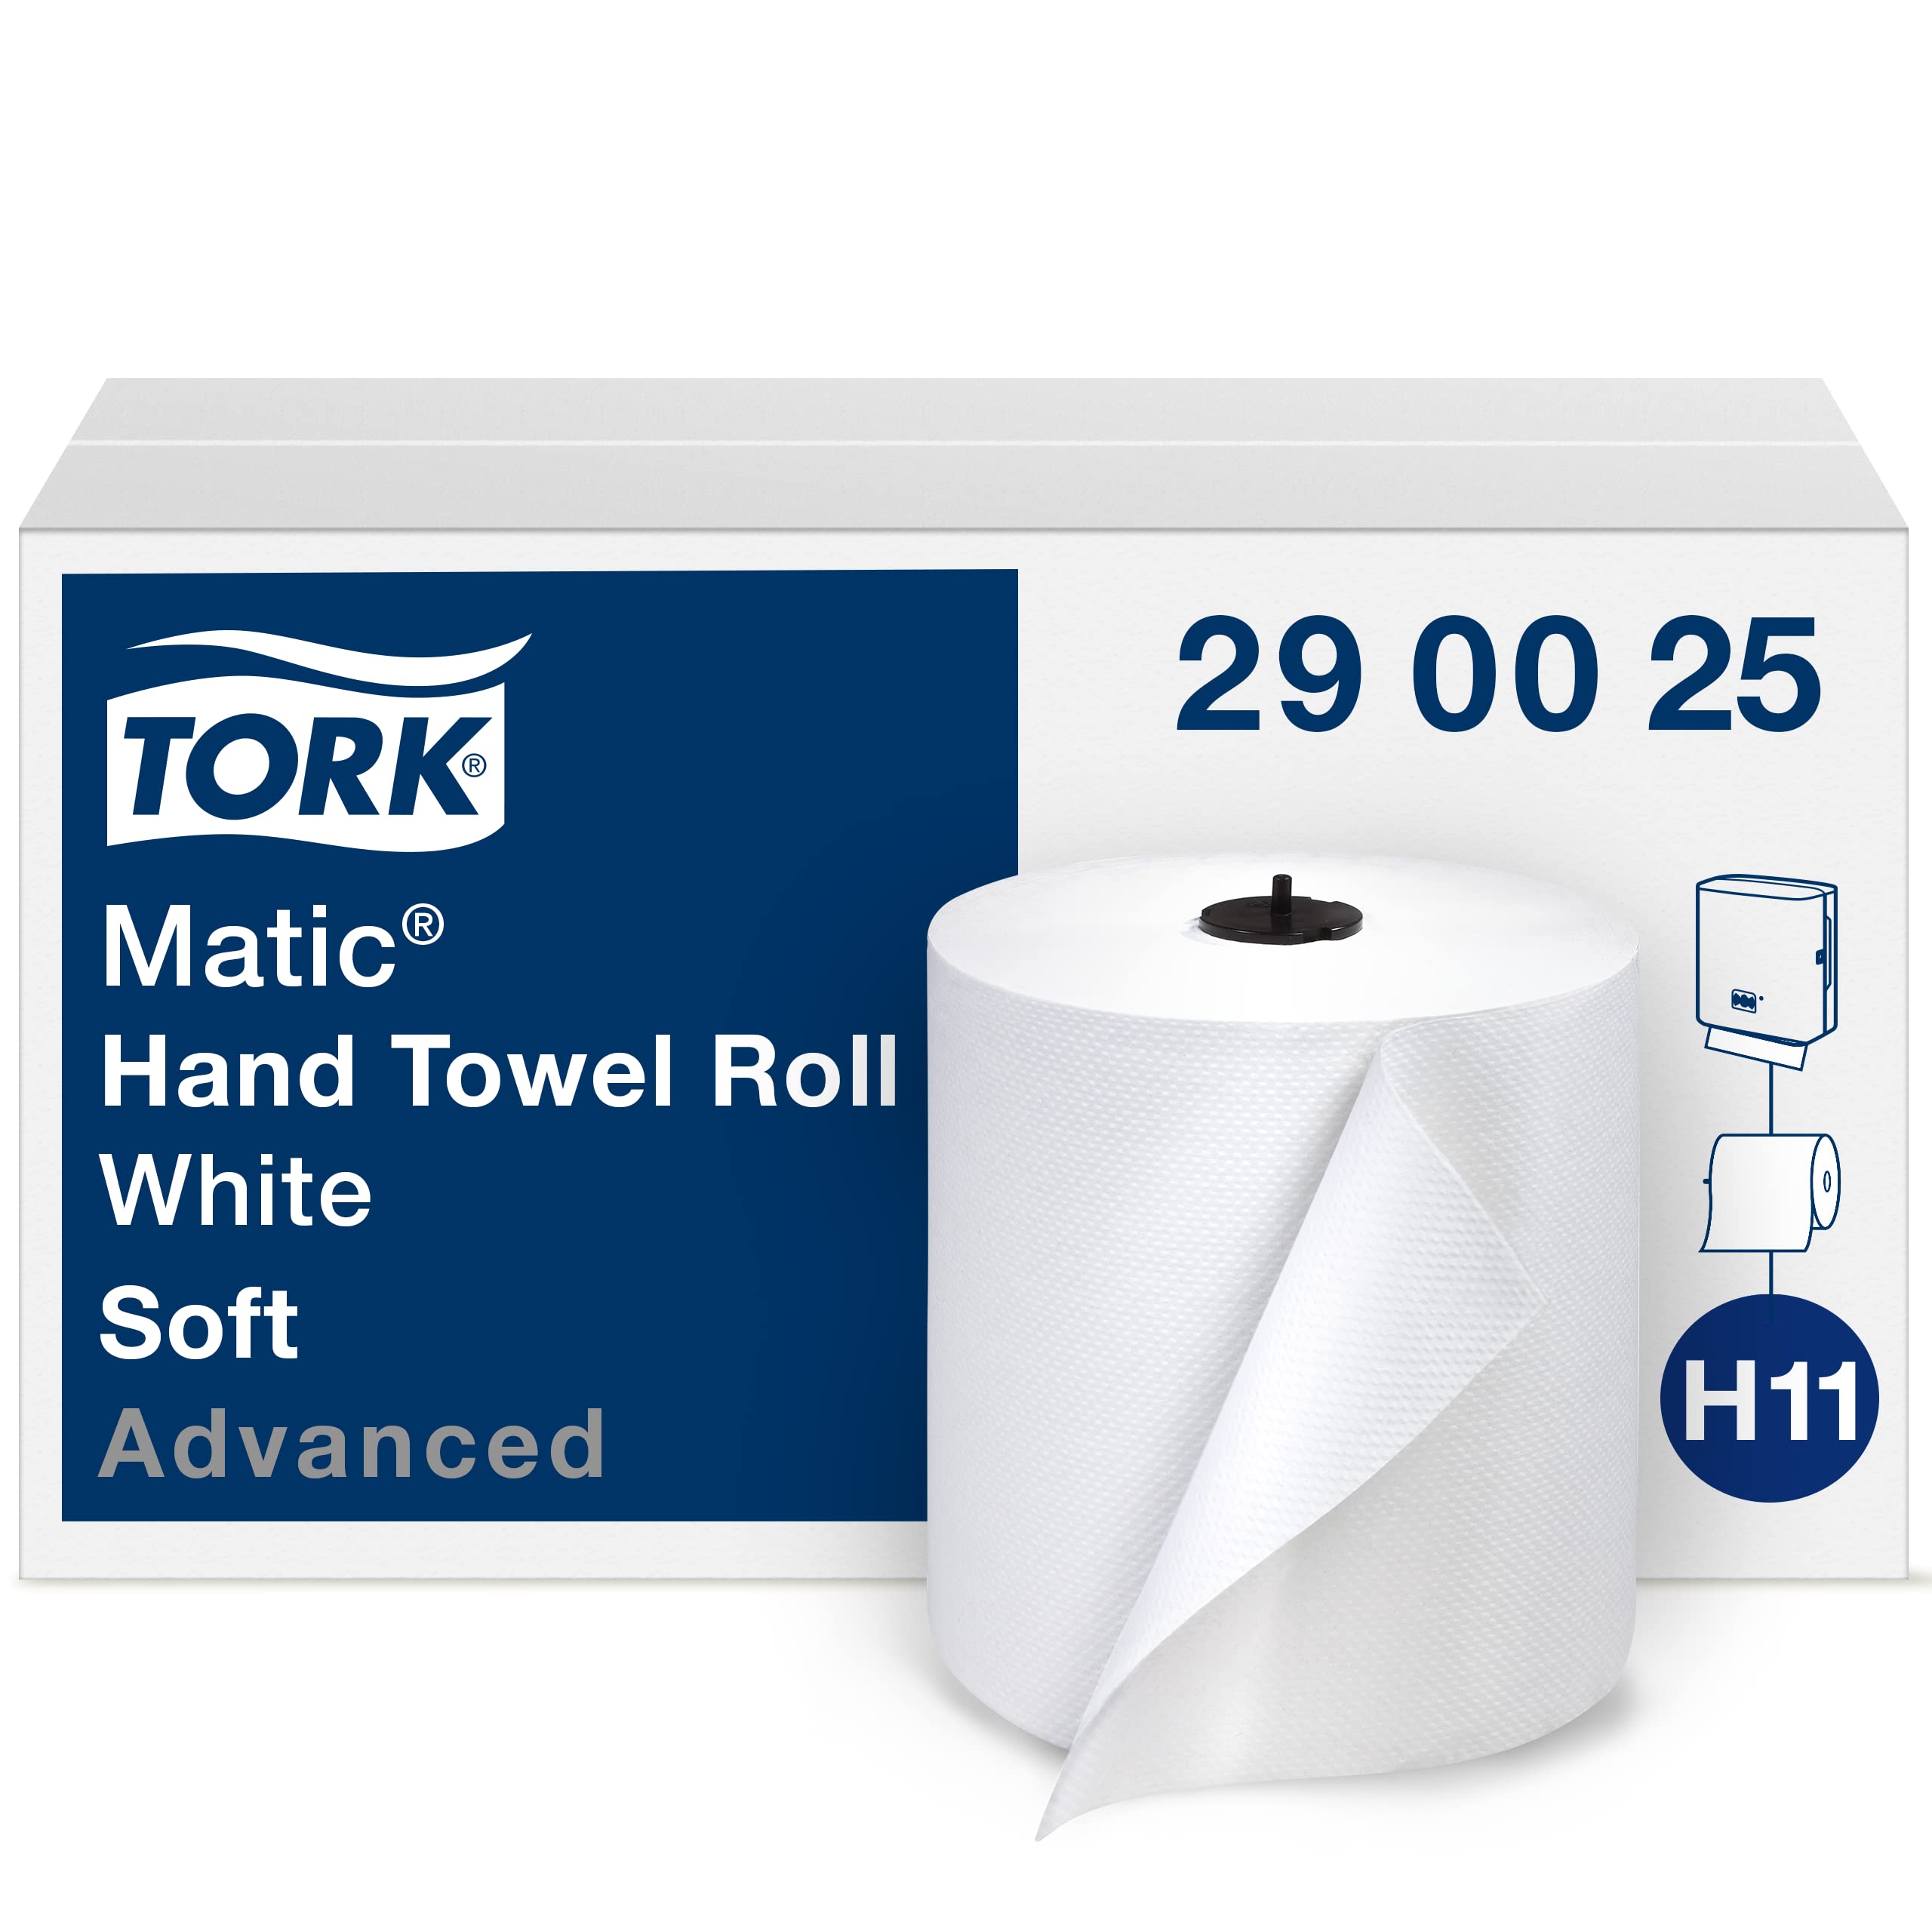 Tork Matic Paper Towel Roll, White - Hand Towel Roll with High Absorbency and Extra Soft Tissues, 6 Rolls x 900 ft, Compatible with H11 Tork Matic ...